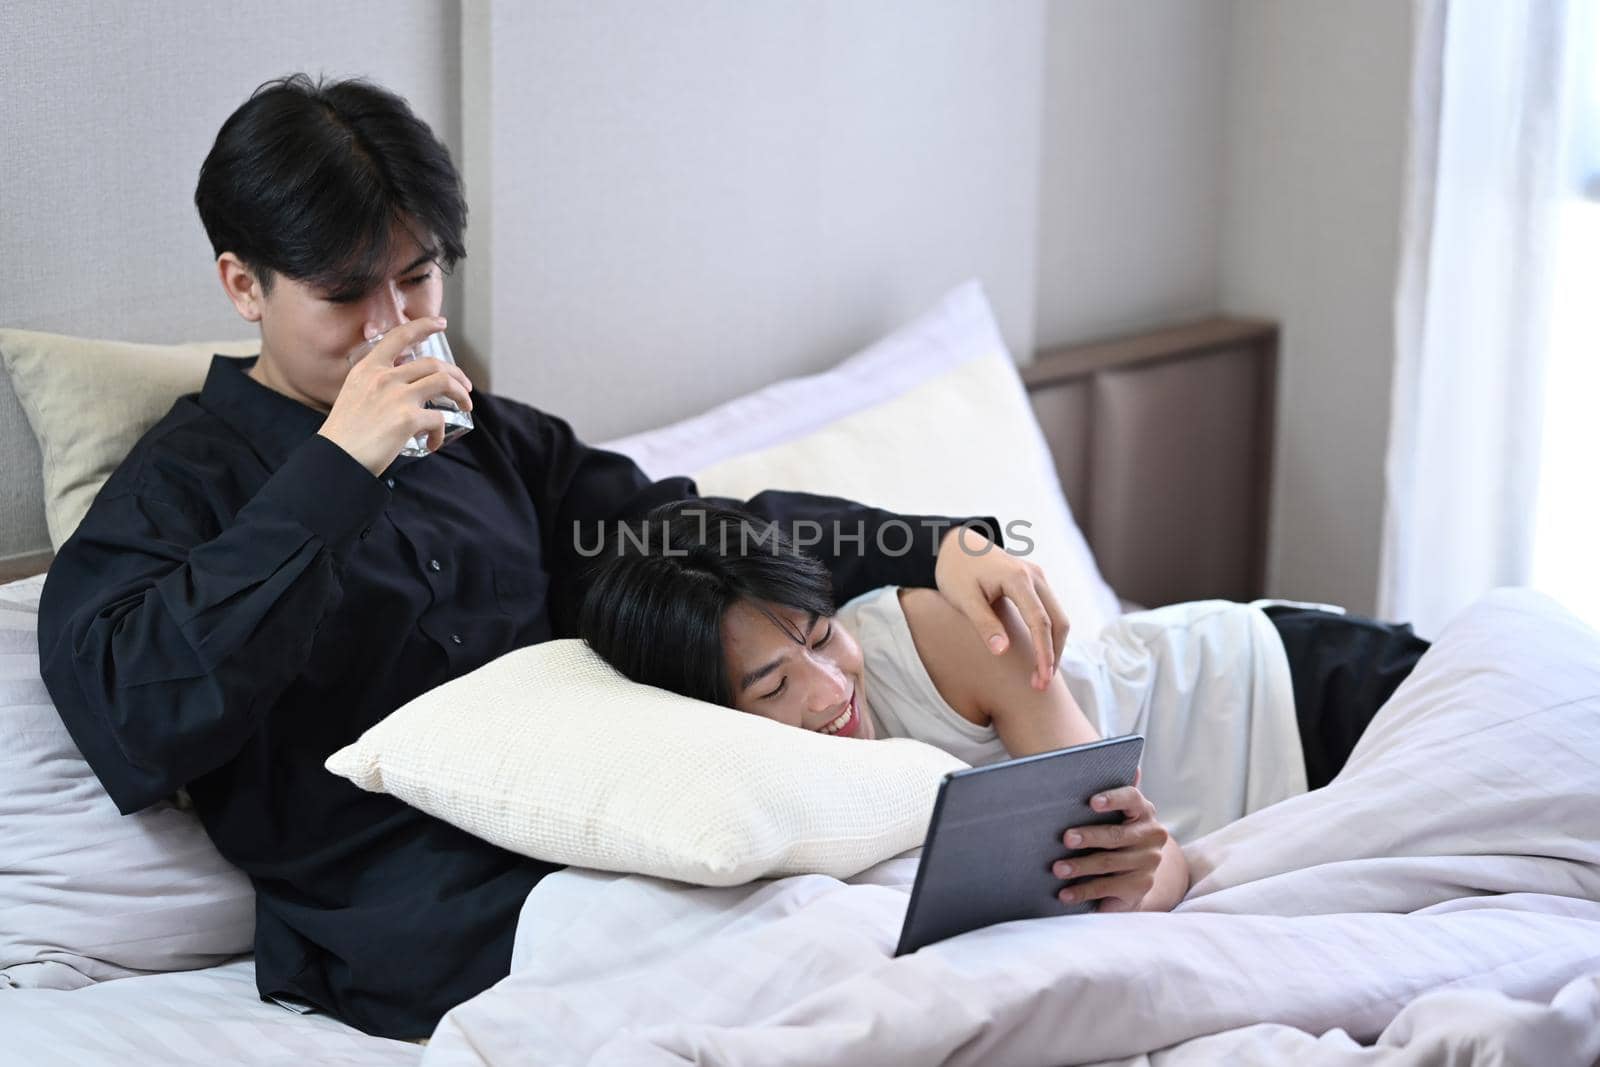 Loving homosexual couple embracing using digital tablet on bed. LGBT and love concept.